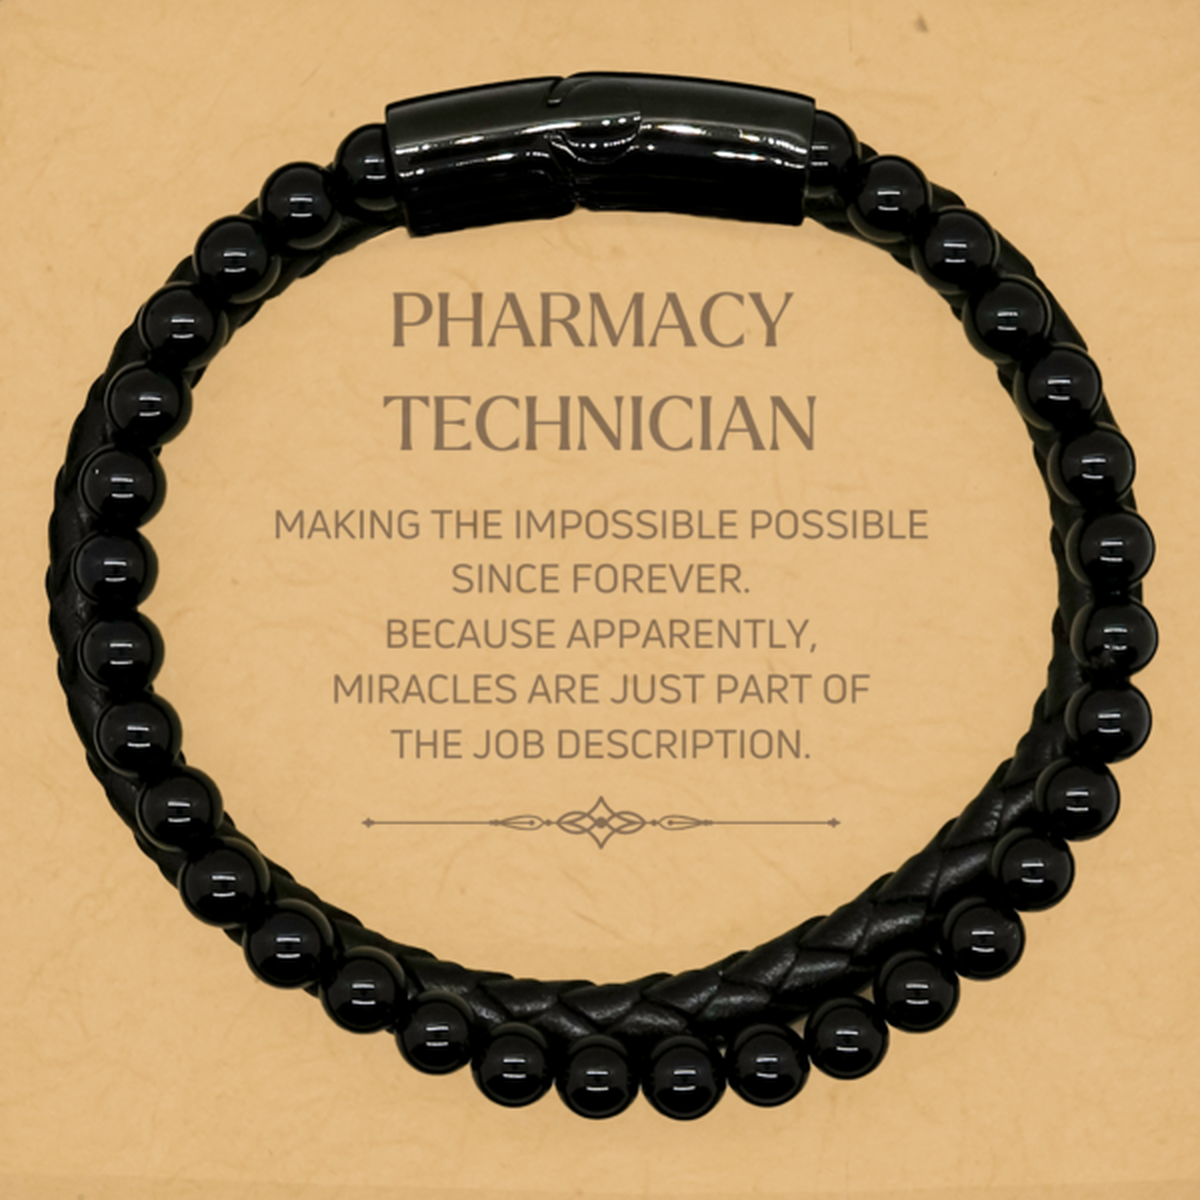 Funny Pharmacy Technician Gifts, Miracles are just part of the job description, Inspirational Birthday Stone Leather Bracelets For Pharmacy Technician, Men, Women, Coworkers, Friends, Boss